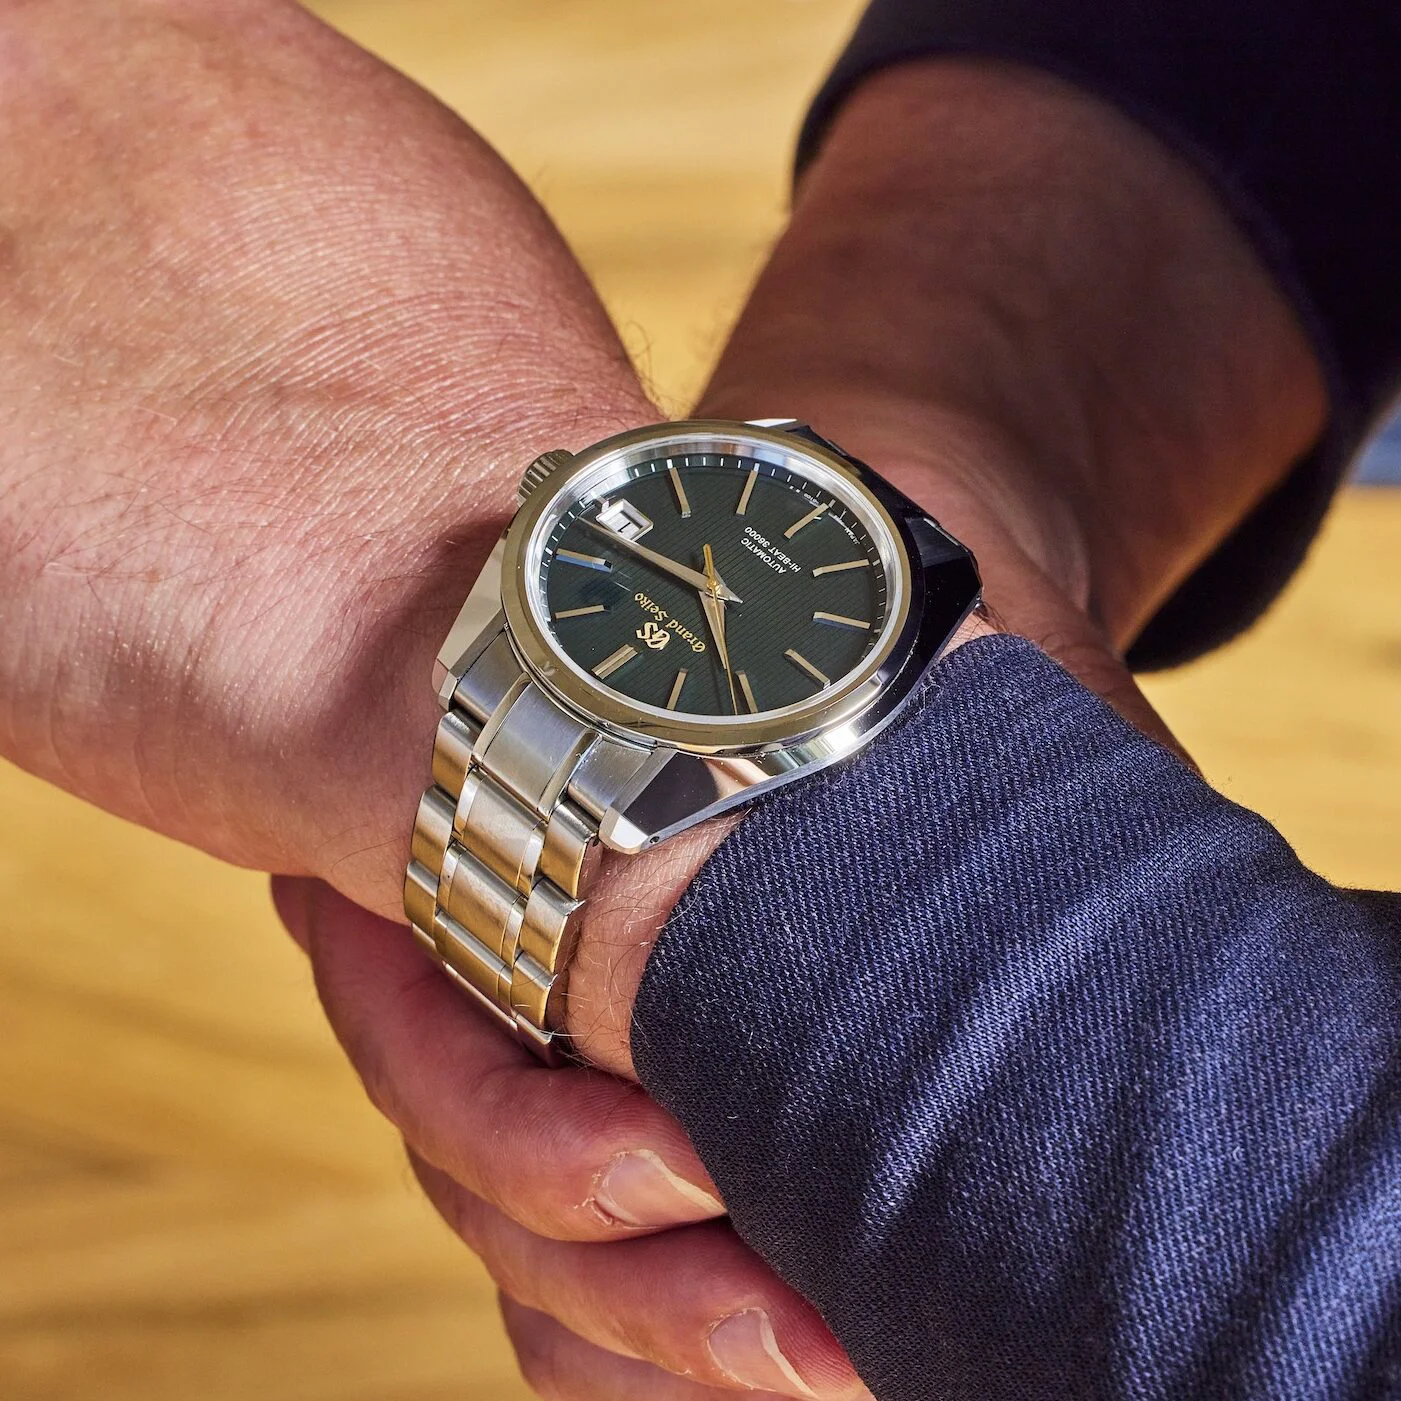 The Grand Seiko you can buy at their Studio Shizukuishi Japan - Time and Tide Watches